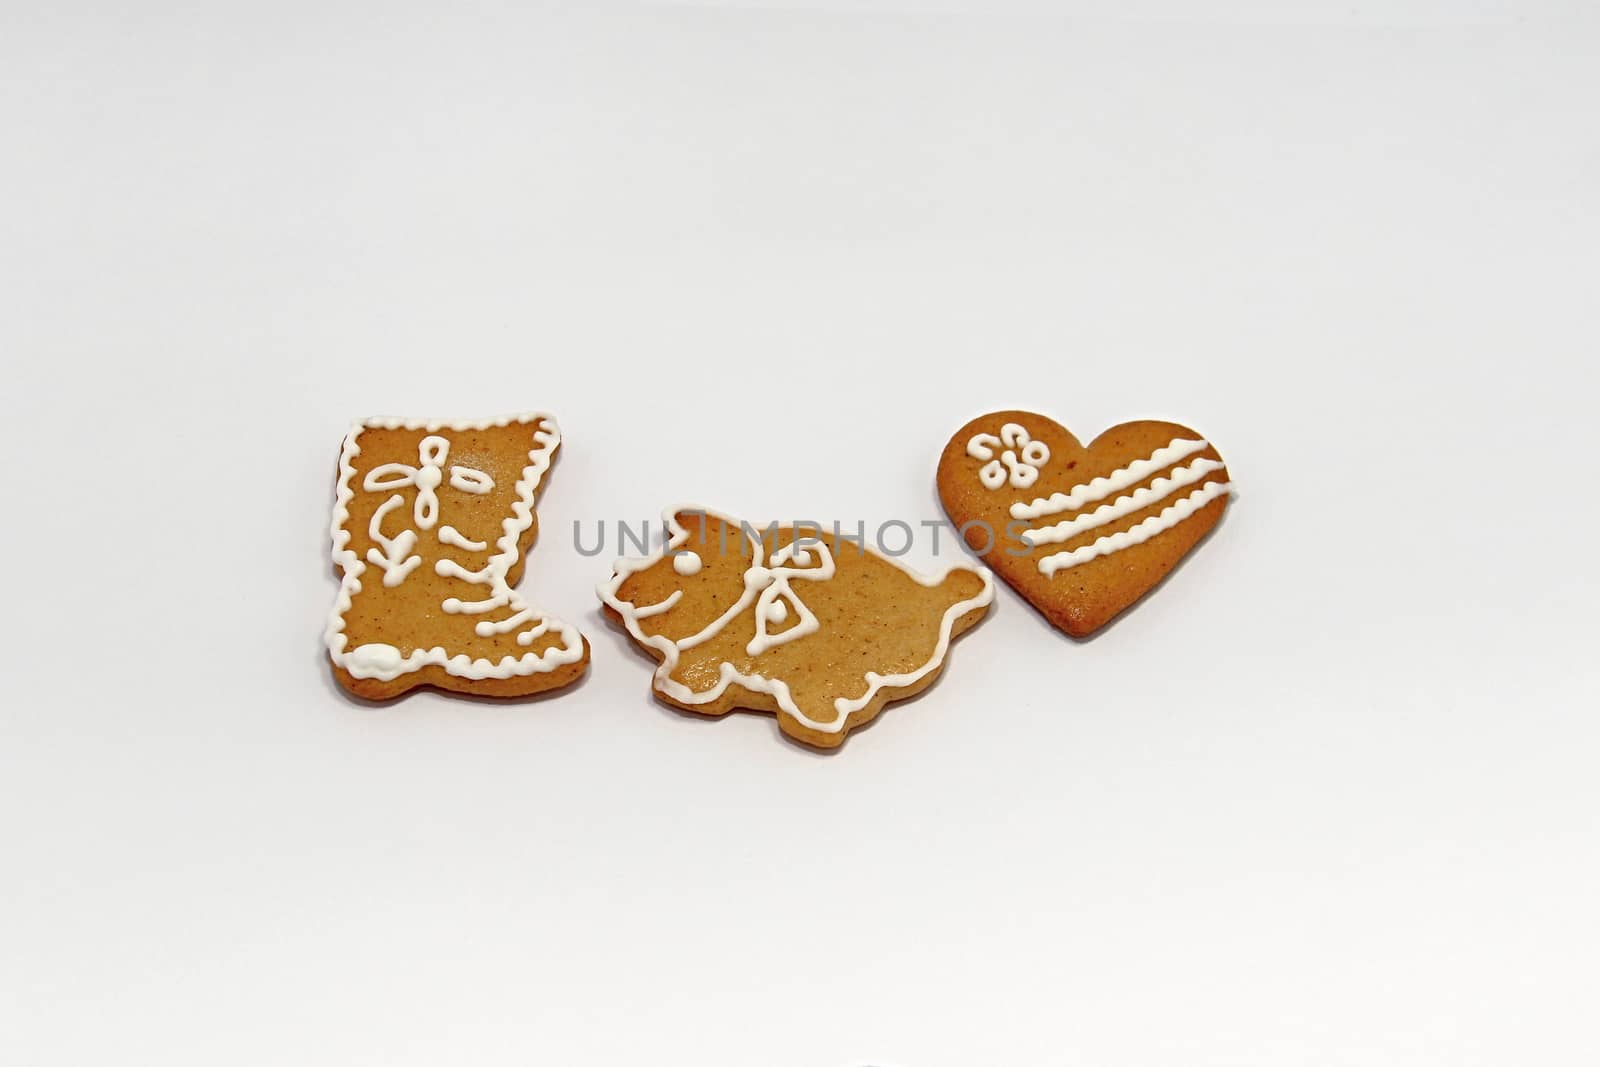 Christmas Gingerbread Cookies by Dermot68